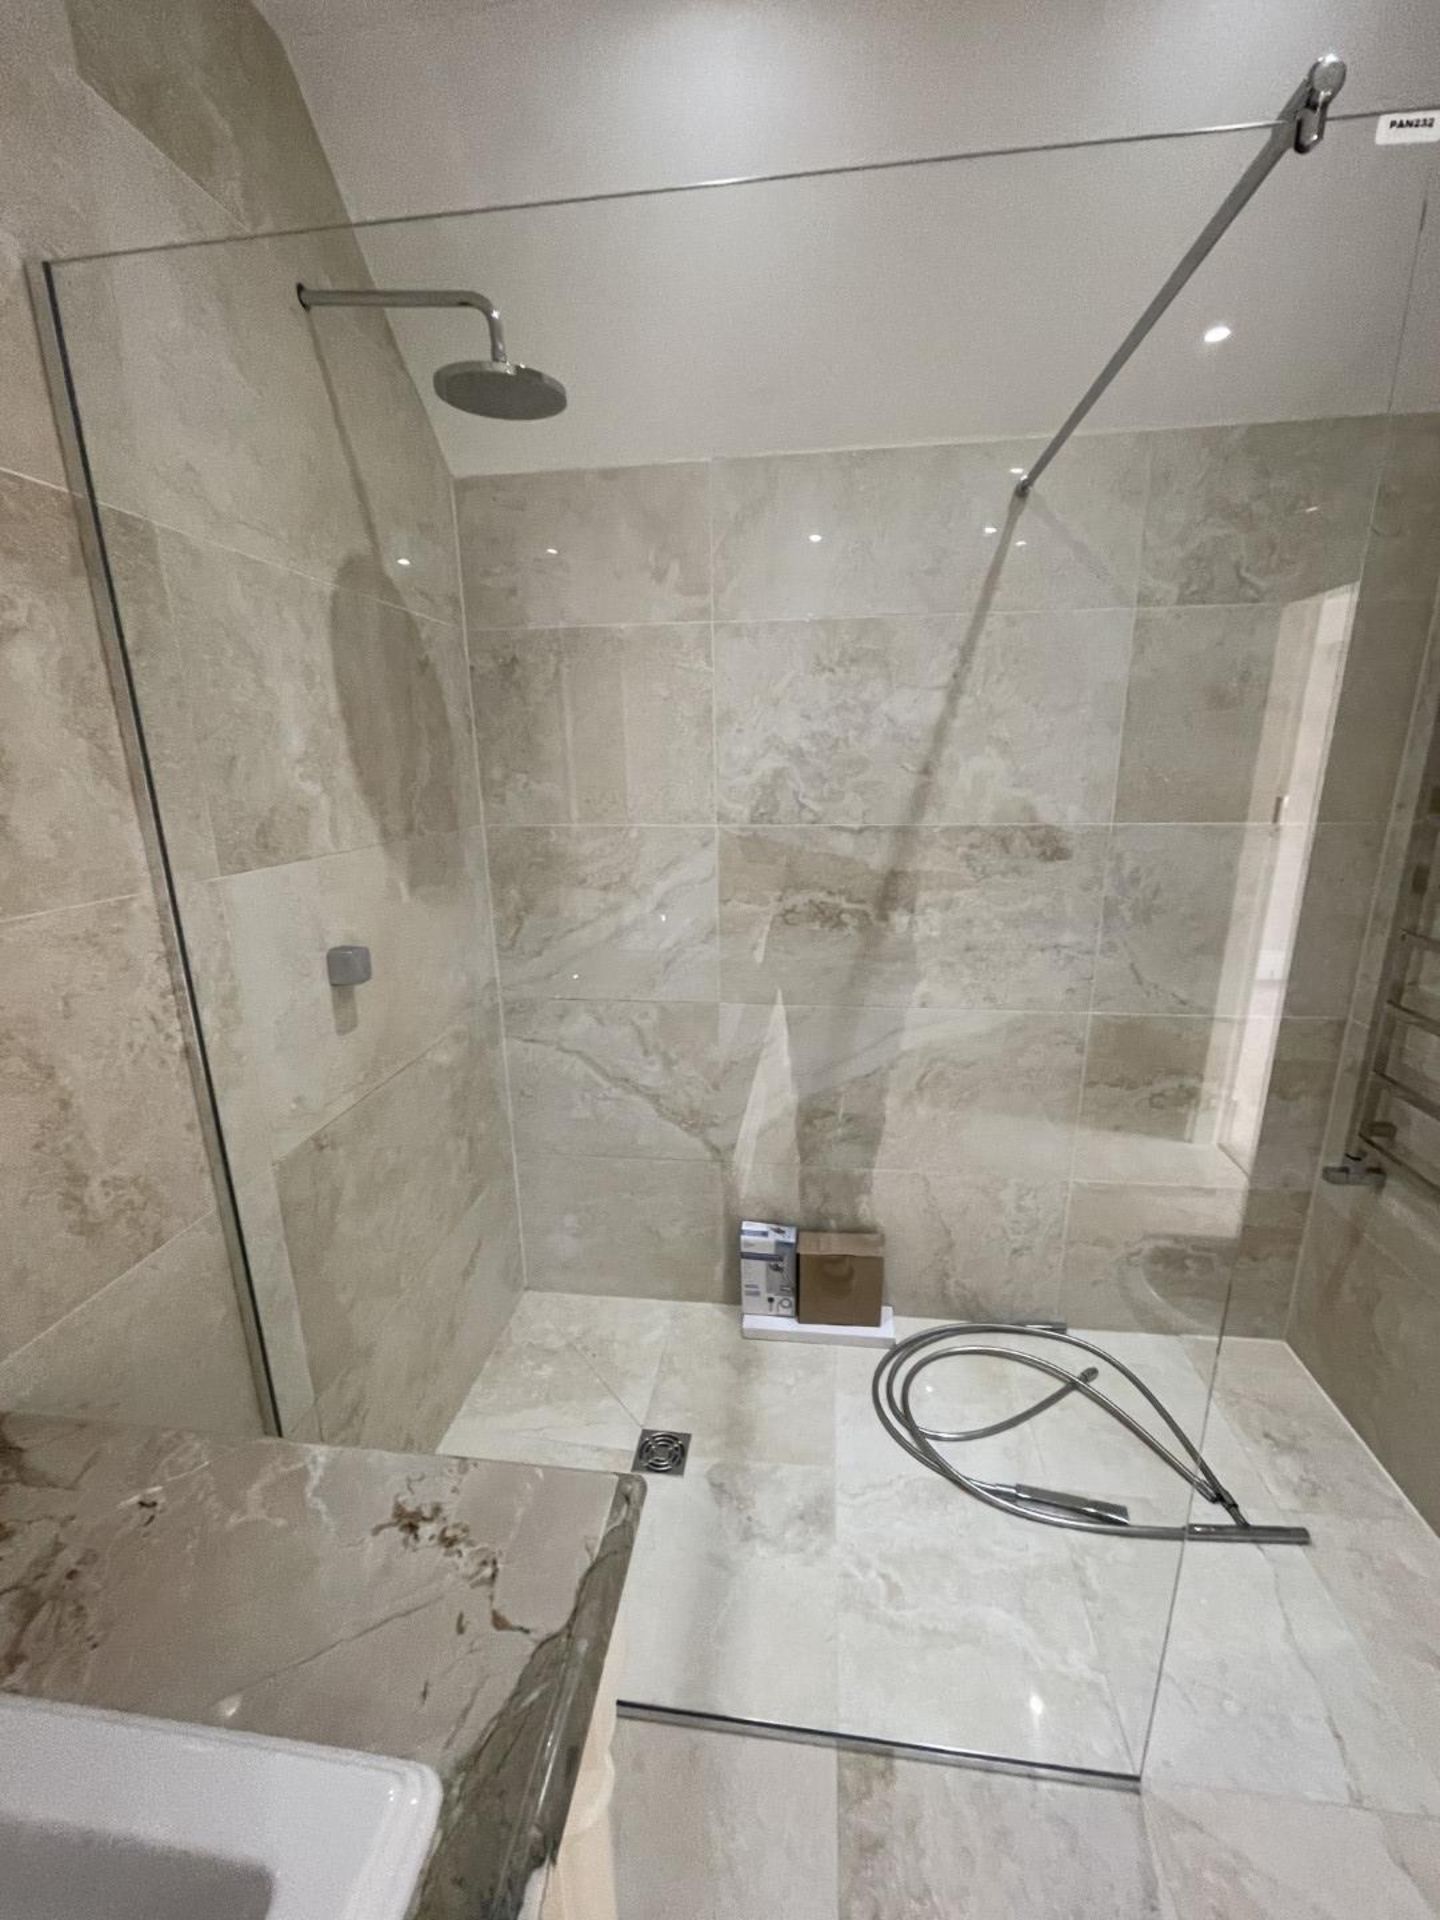 1 x Premium Shower and Enclosure + Hansgrove Controls and Thermostat - Ref: PAN232 - CL896 - NO - Image 8 of 21